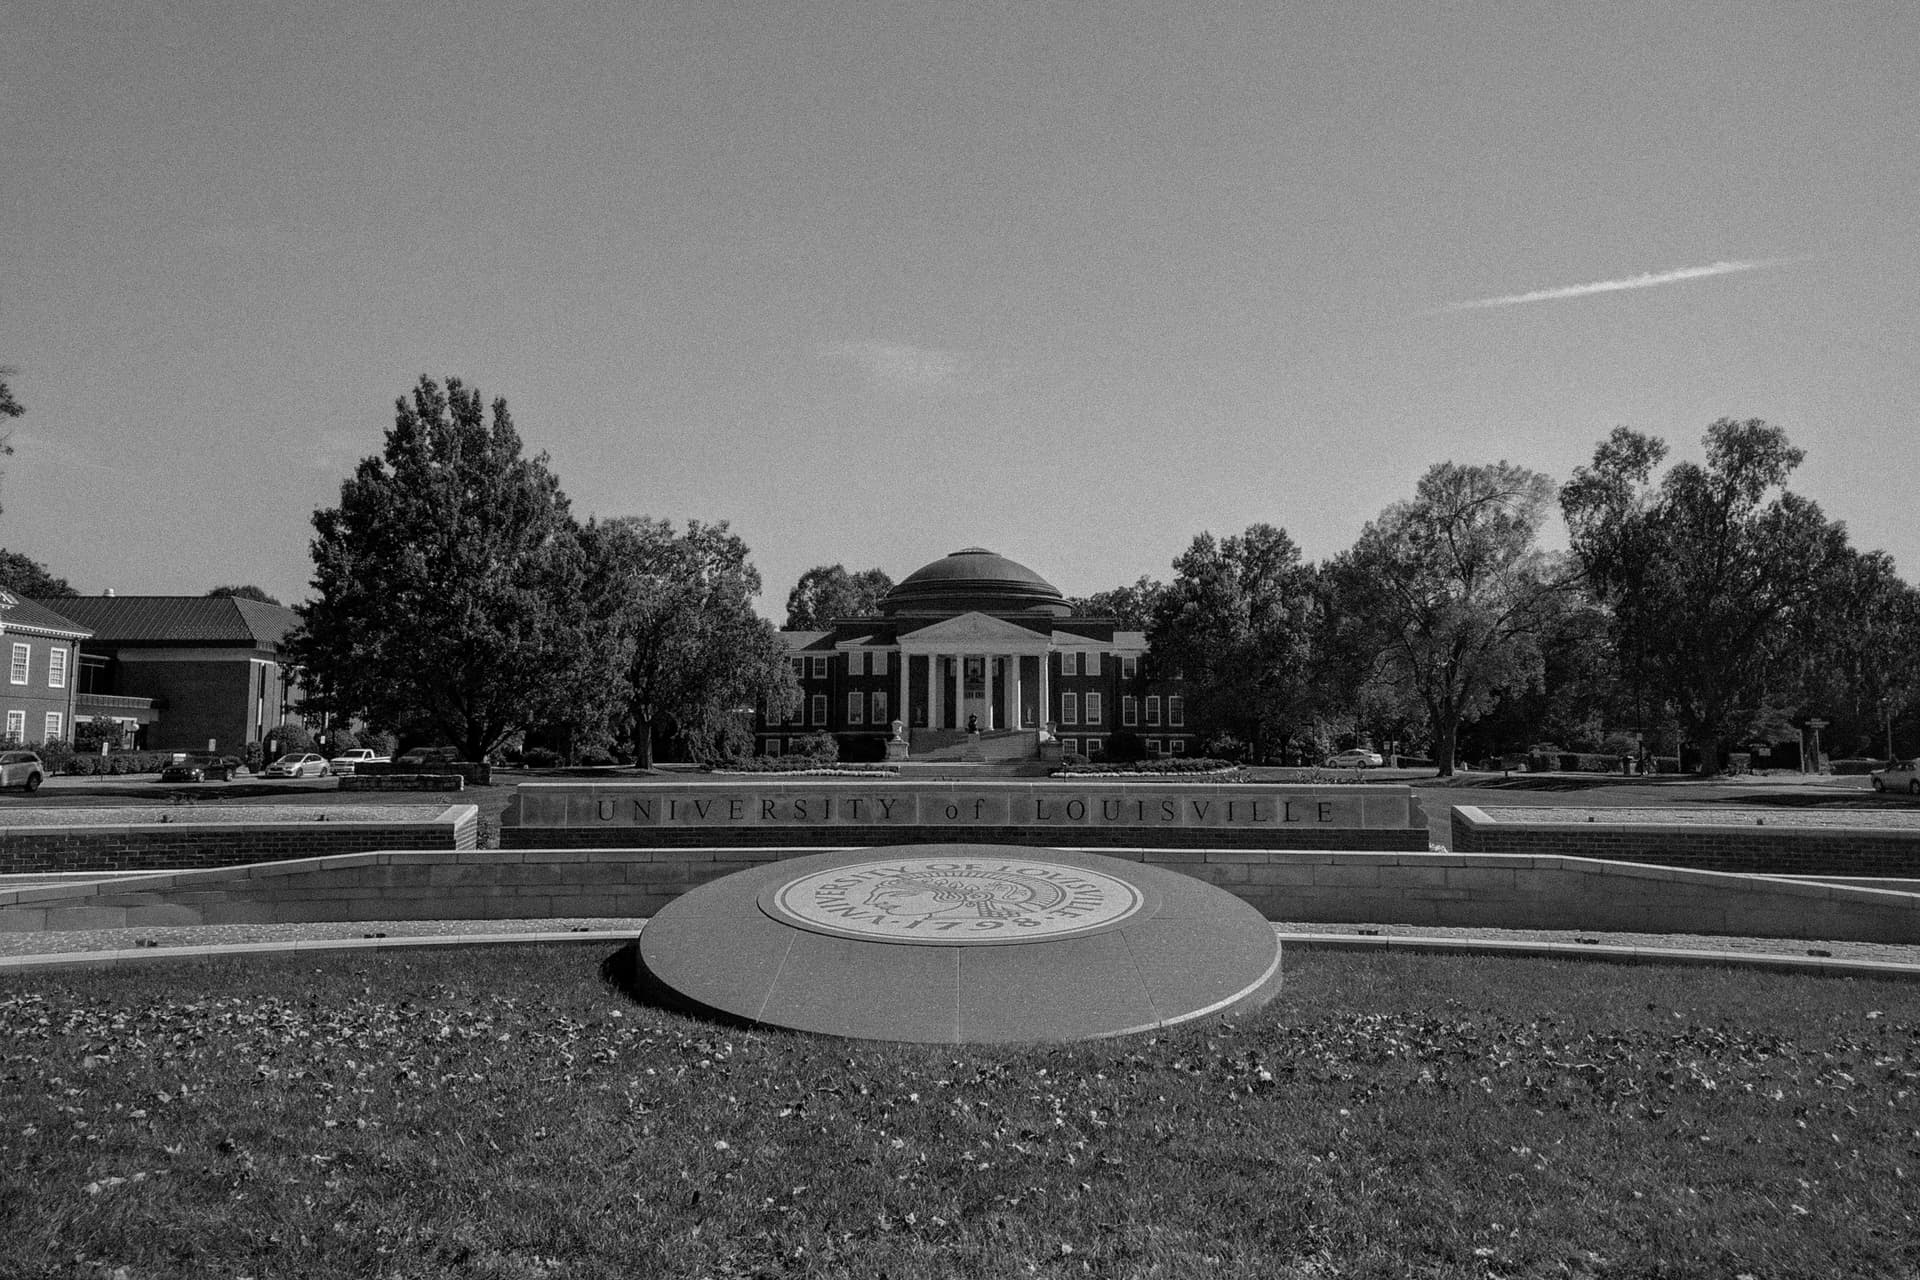 A prominent domed building on the campus of the University of Louisville. In the foreground is a stone carved into an image of the university's seal.